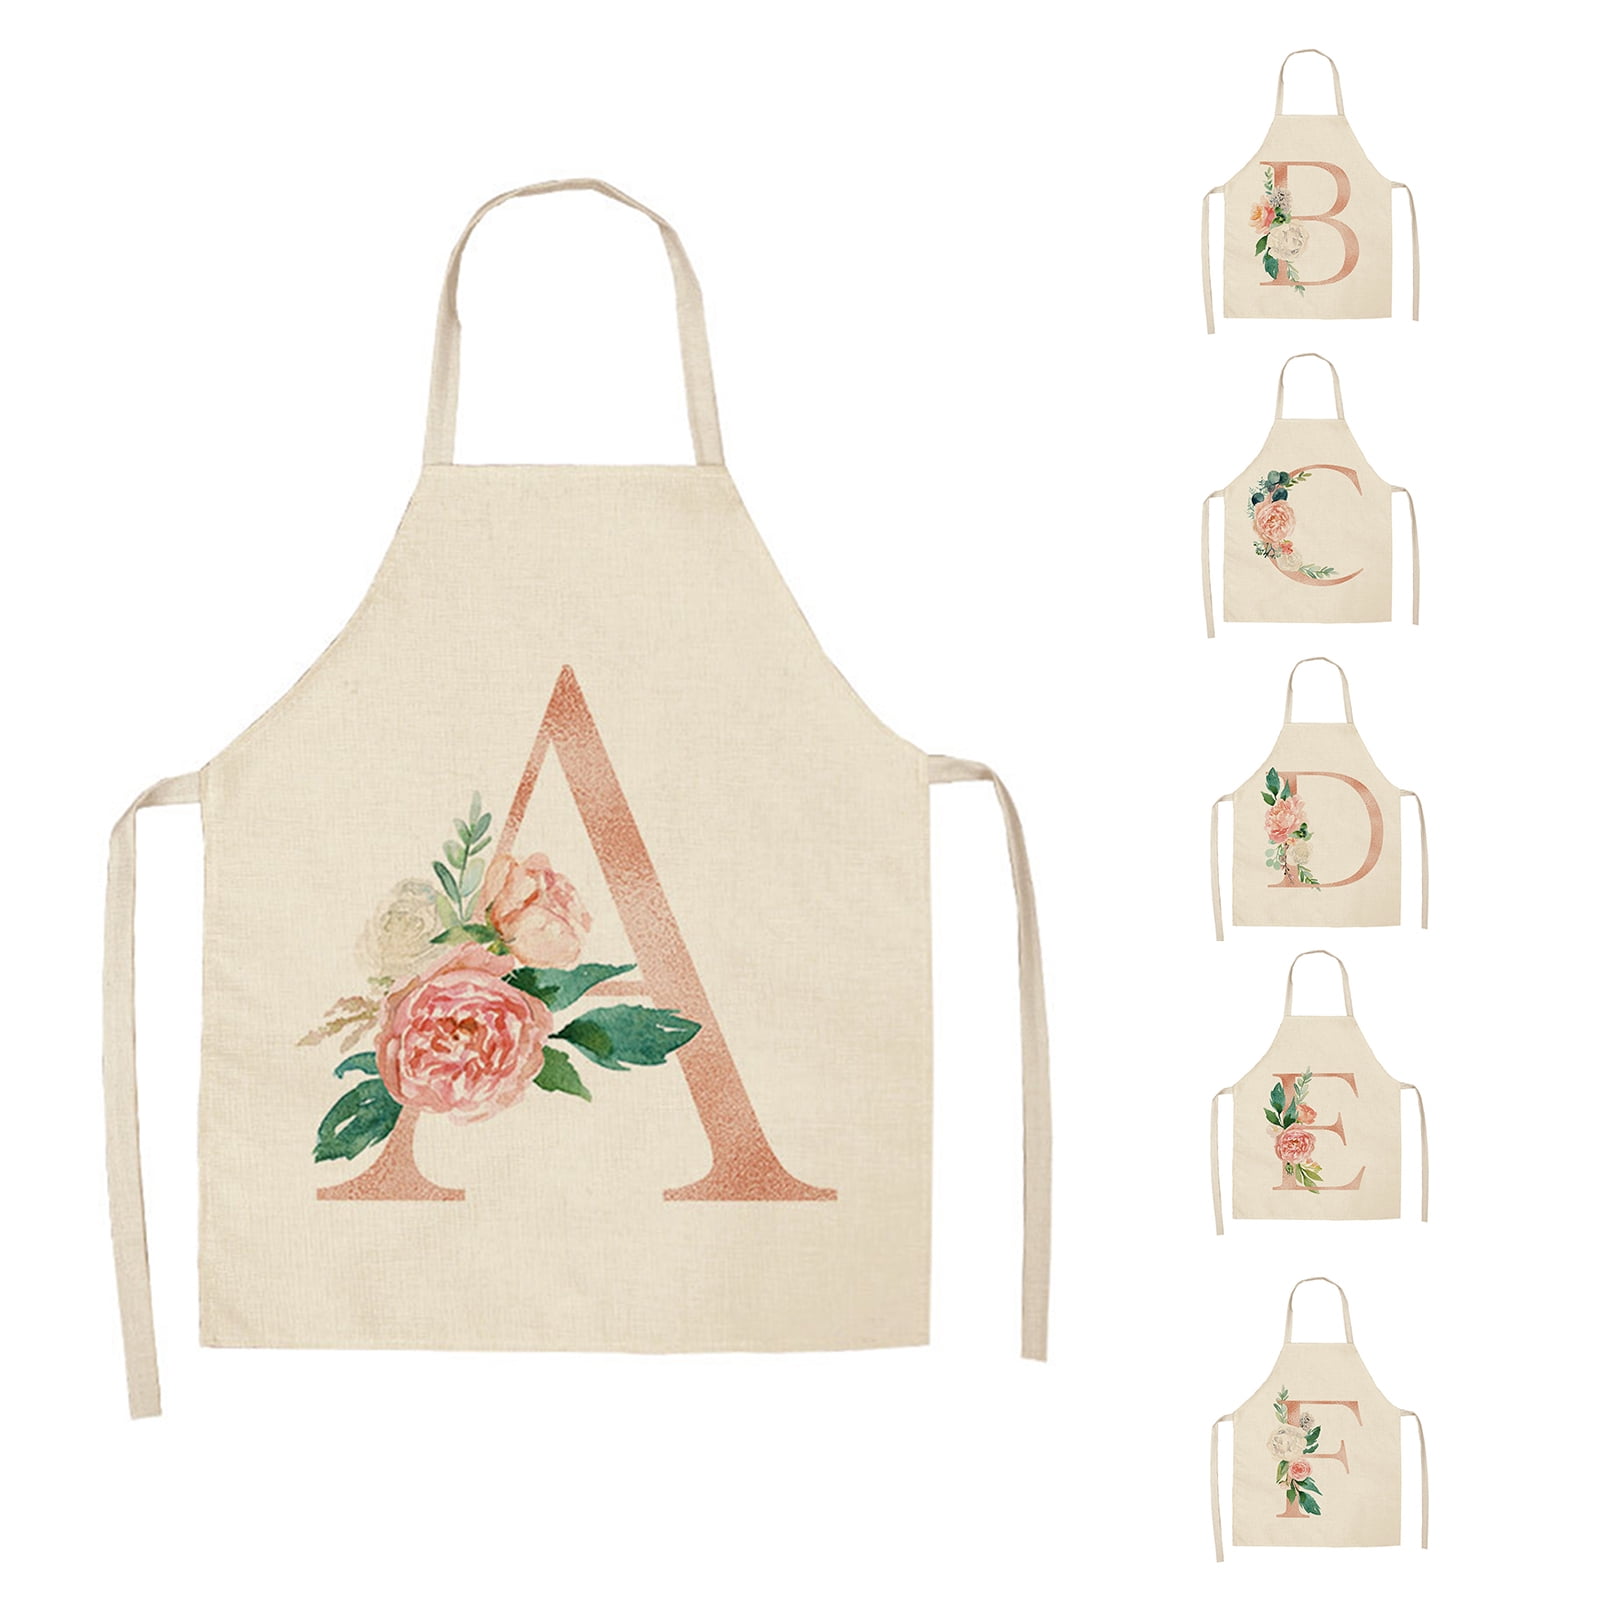 Letter T is for Turtle Chefs Apron